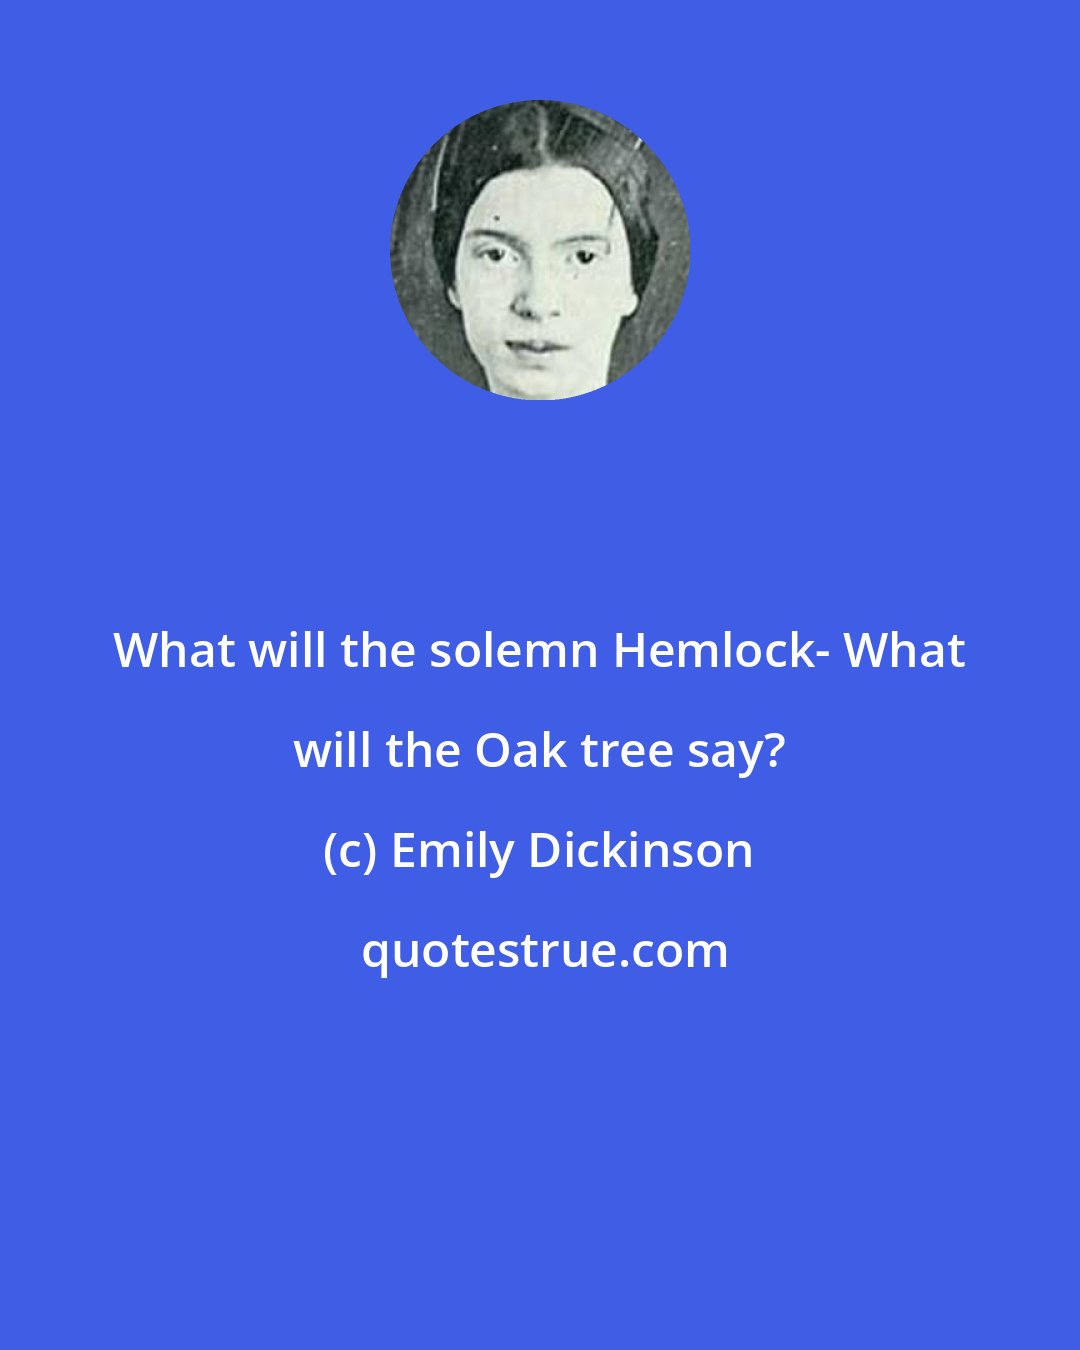 Emily Dickinson: What will the solemn Hemlock- What will the Oak tree say?